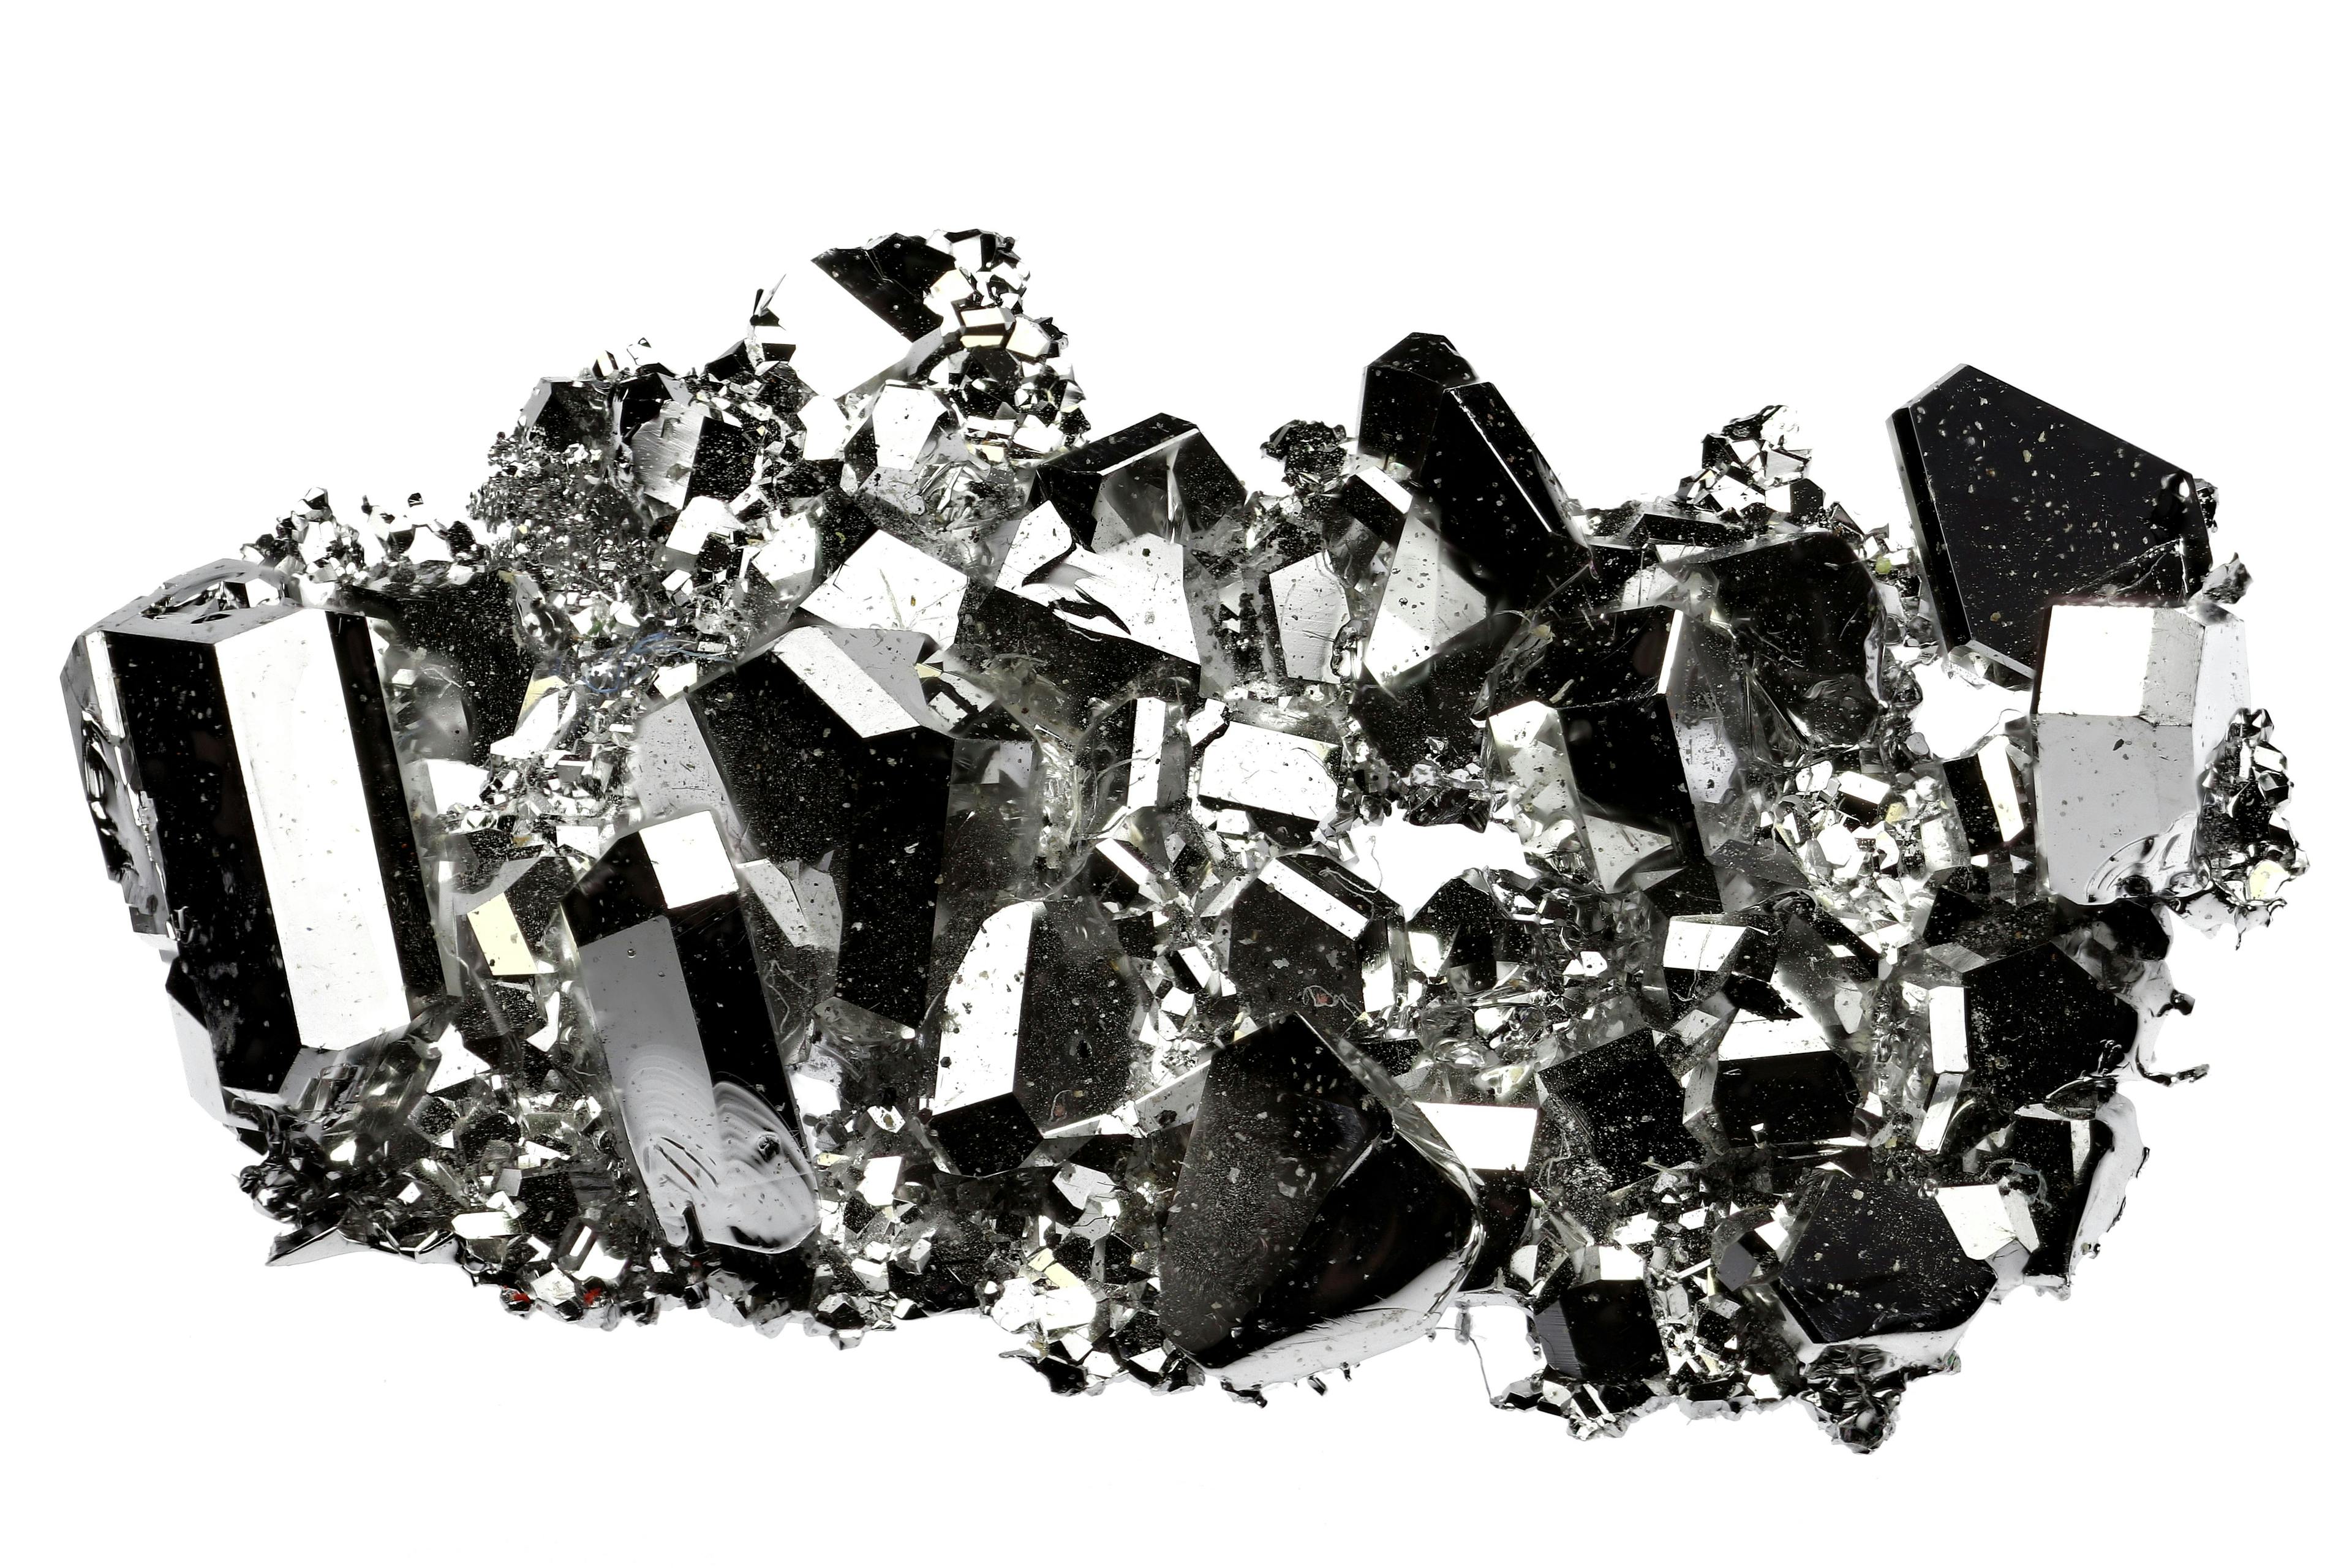 99.99% fine ruthenium crystal grown by vapour deposition isolated on white background | Image Credit: © Björn Wylezich - stock.adobe.com